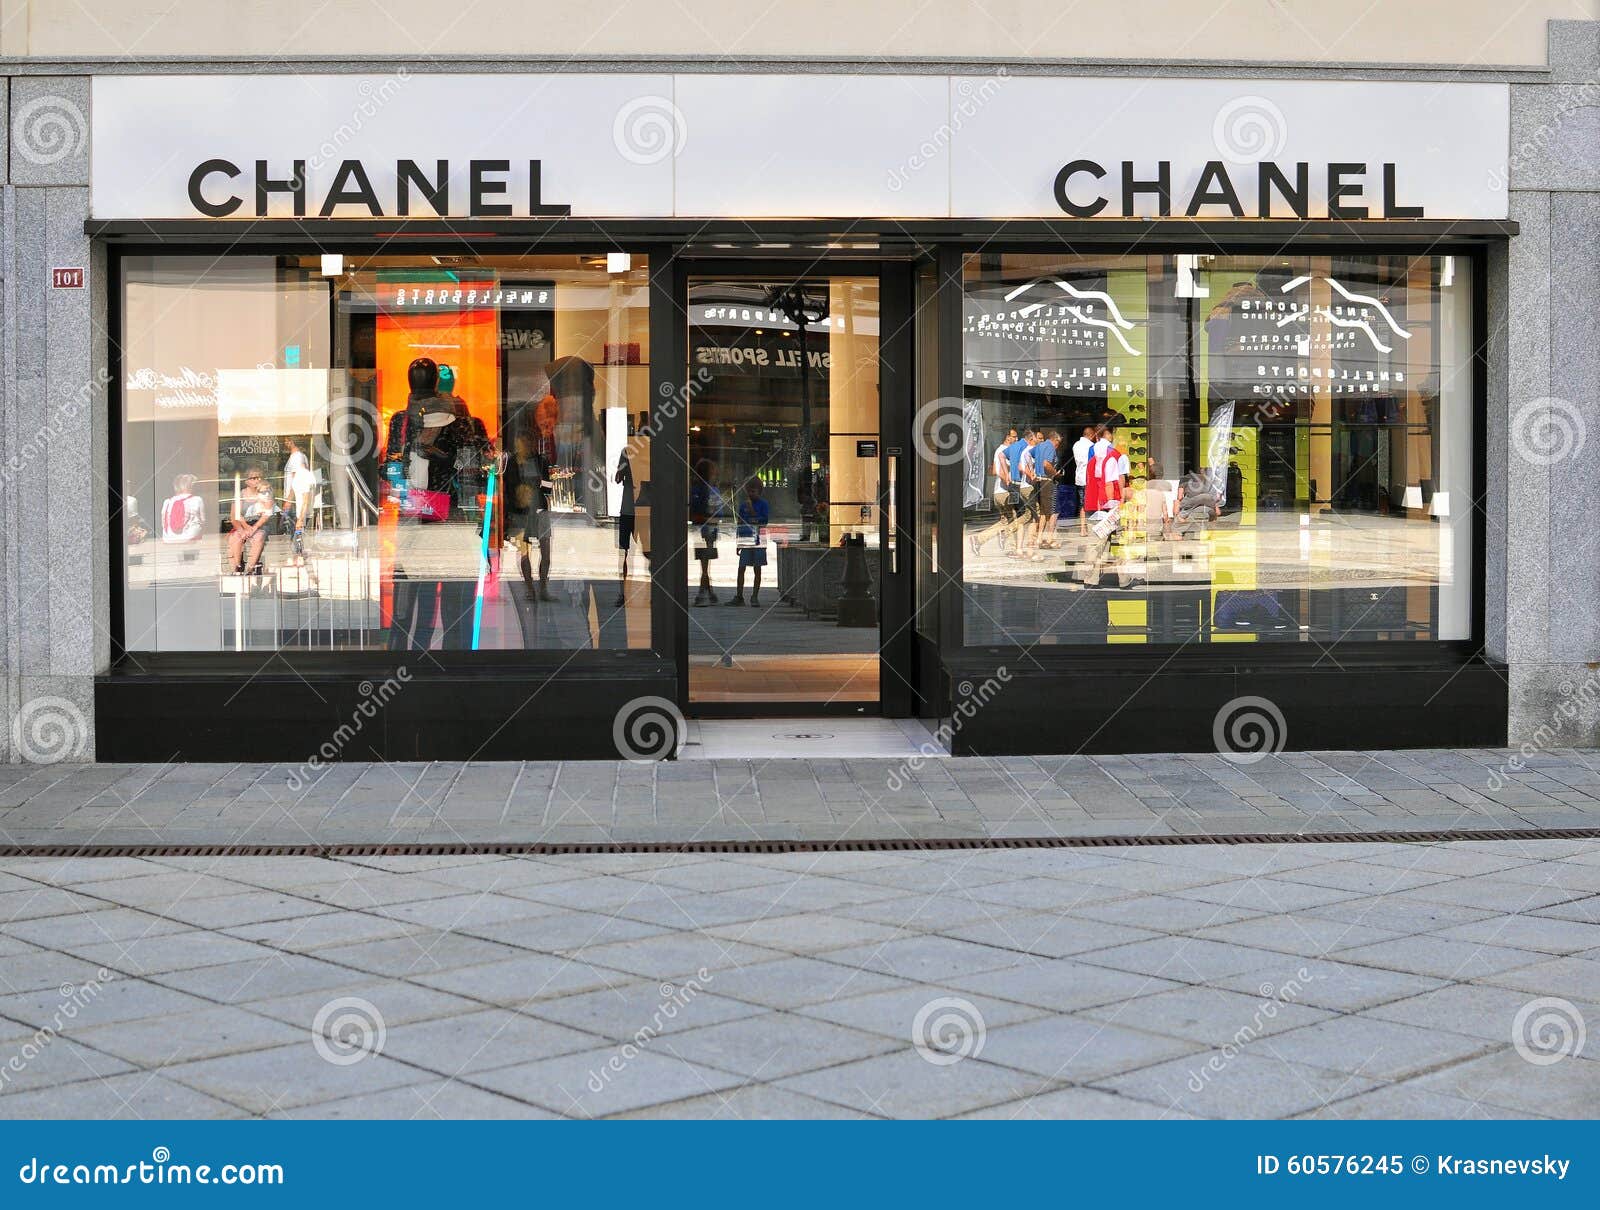 Chanel Store in Chamonix, France Editorial Image - Image of luxury, urban:  60576245